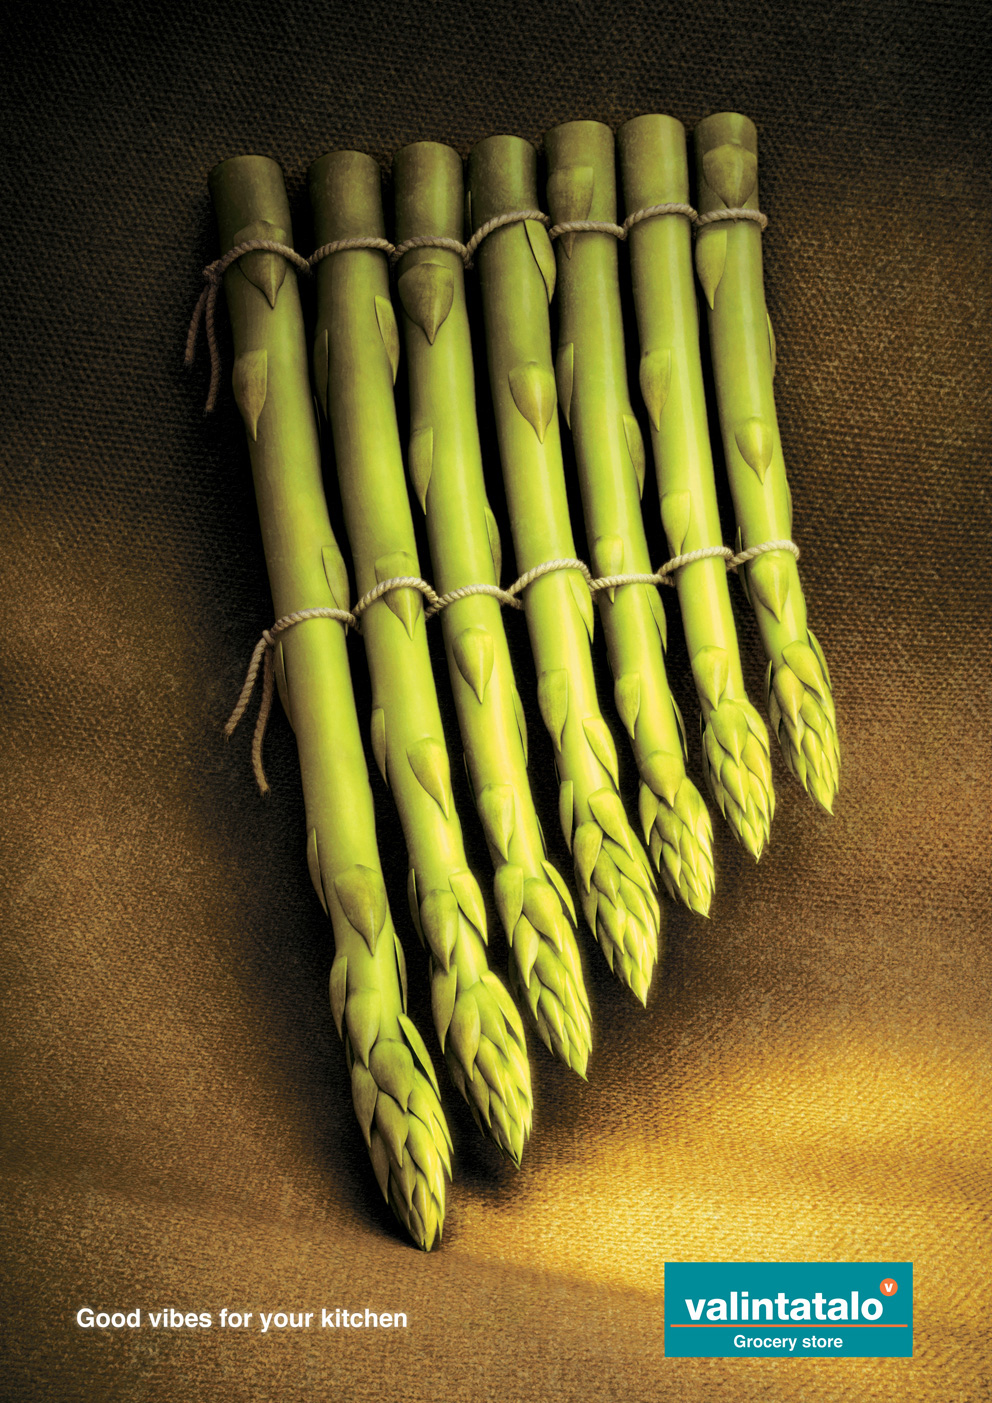 Outdoor asparagus Musical Instrument Food  Grocery store market kitchen